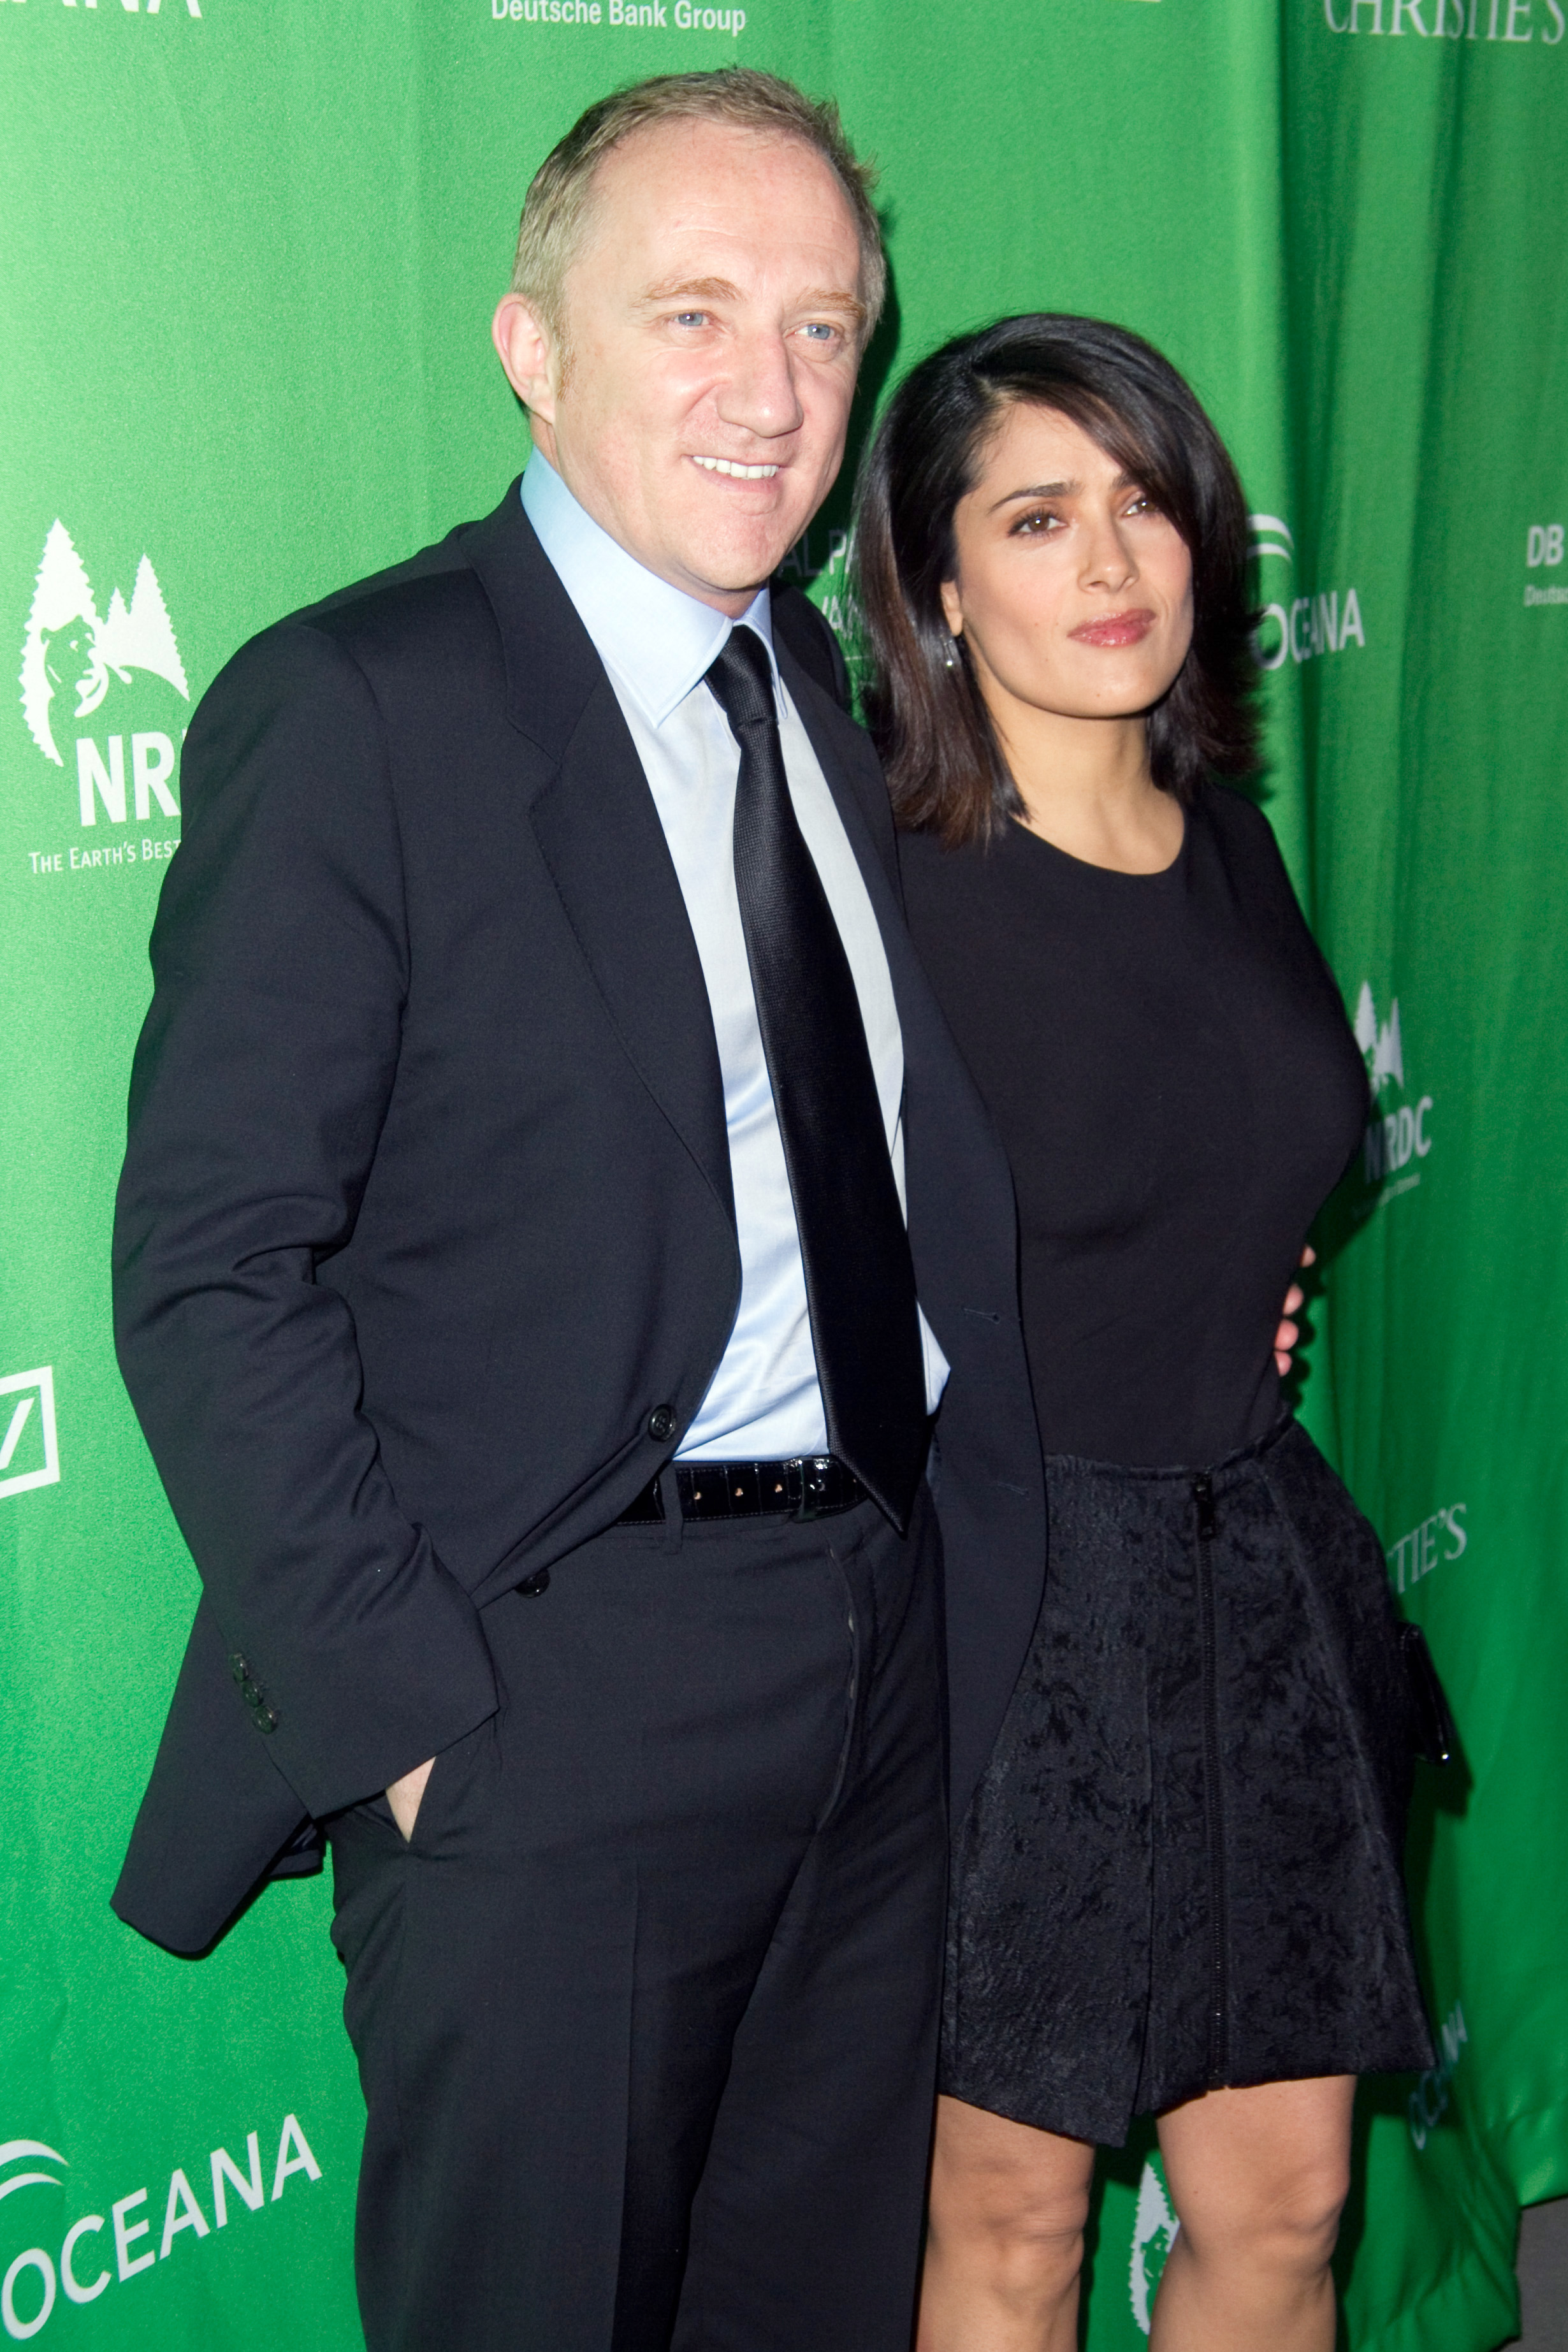 Who Is Salma Hayek's Husband? All About François-Henri Pinault